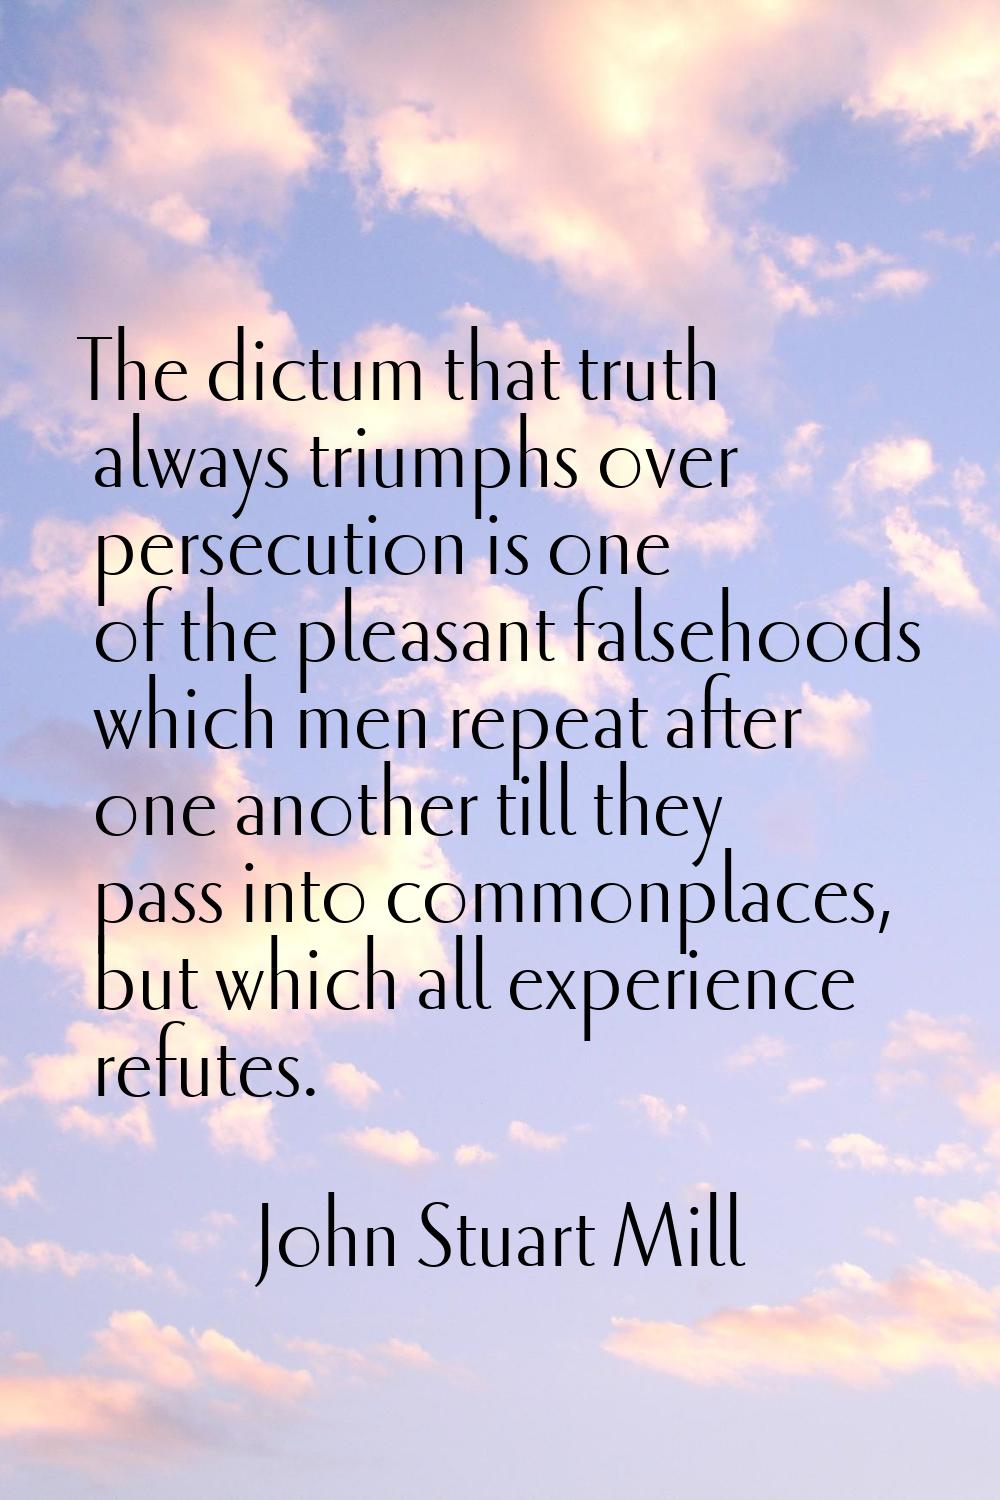 The dictum that truth always triumphs over persecution is one of the pleasant falsehoods which men 